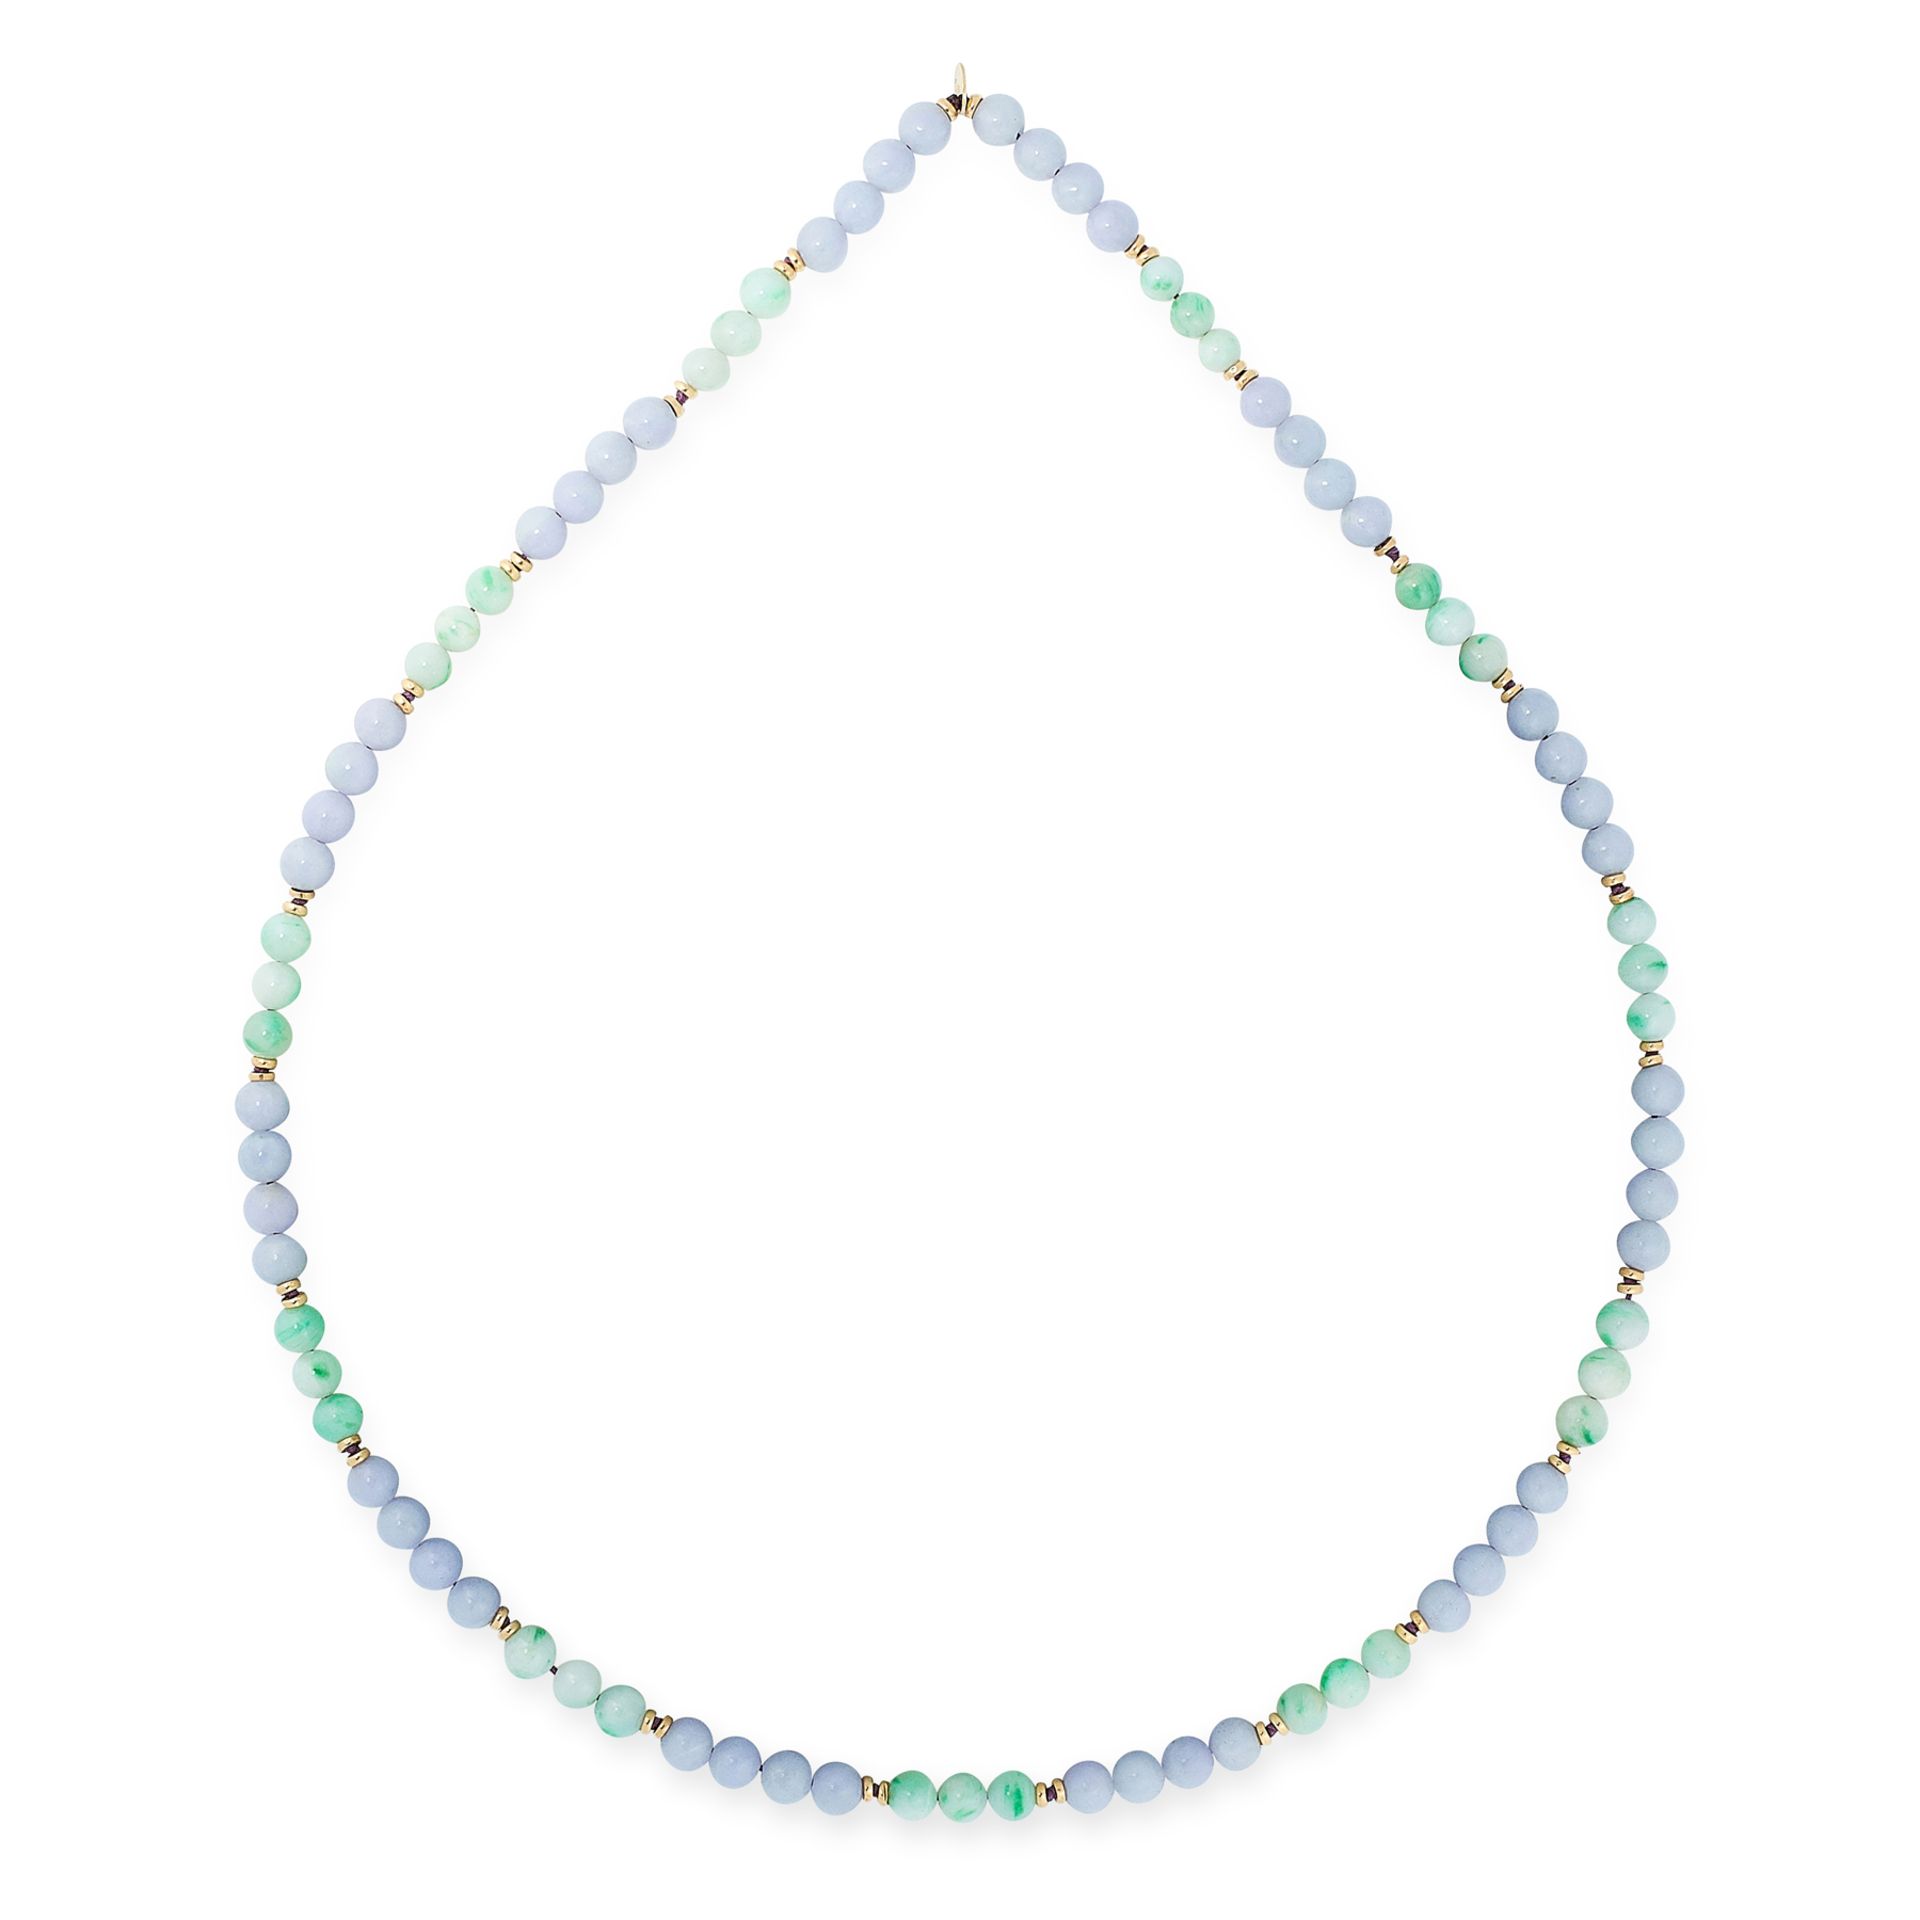 A LAVENDER AND GREEN JADEITE JADE BEAD NECKLACE, TIFFANY & CO in 14ct yellow gold, comprising a